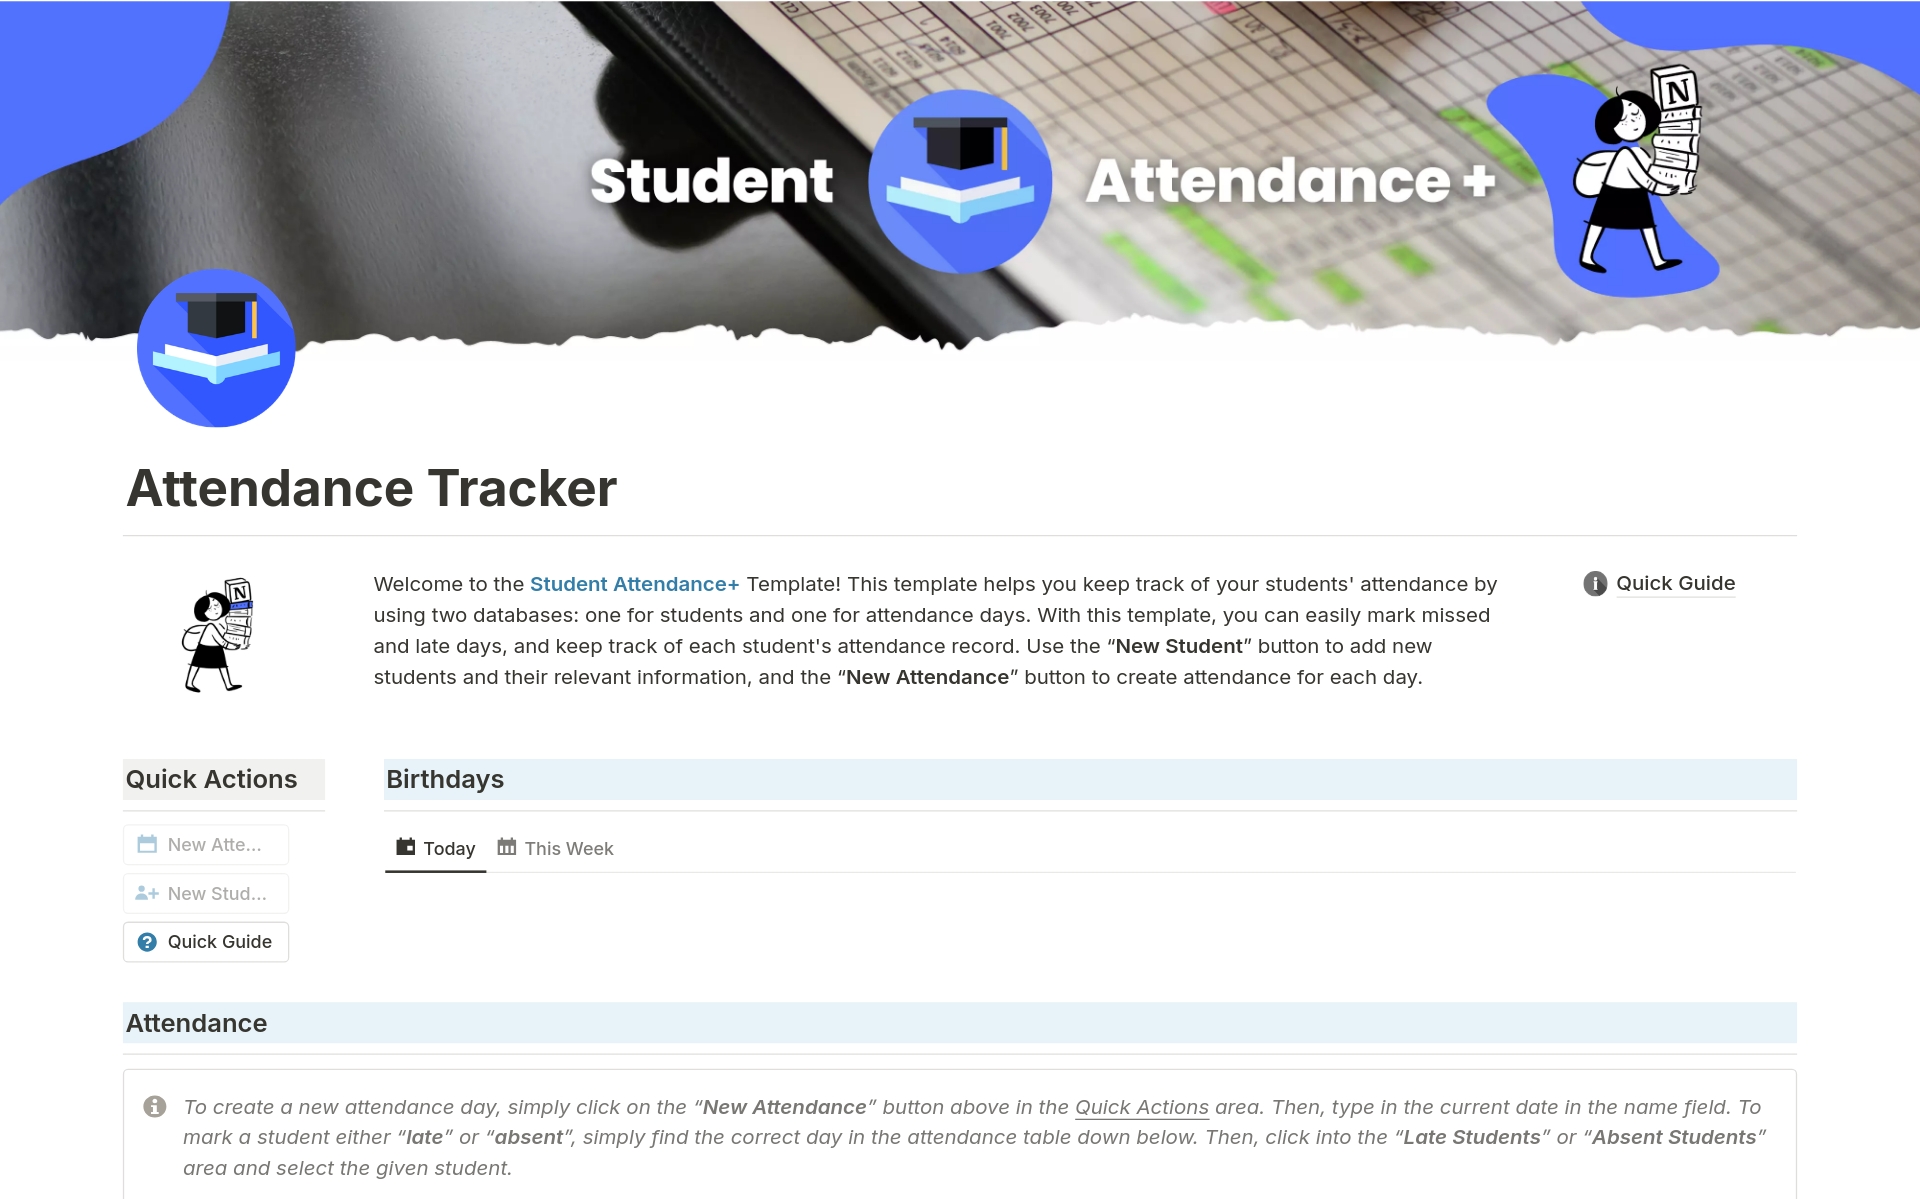 Simplify the process of student attendance tracking and record-keeping for teachers.